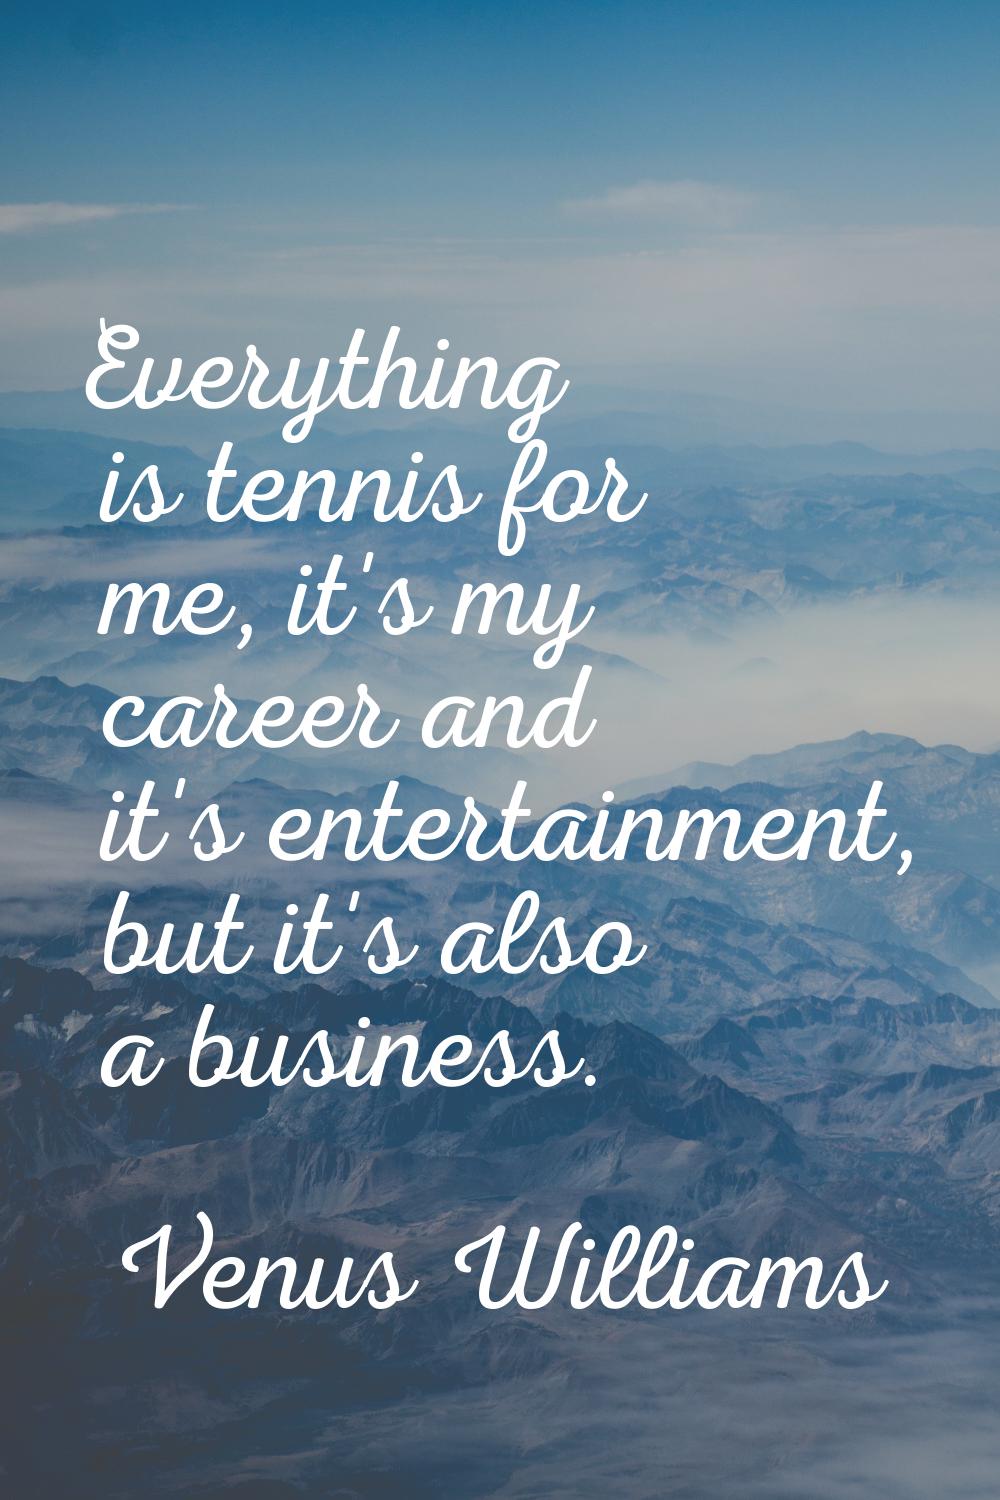 Everything is tennis for me, it's my career and it's entertainment, but it's also a business.